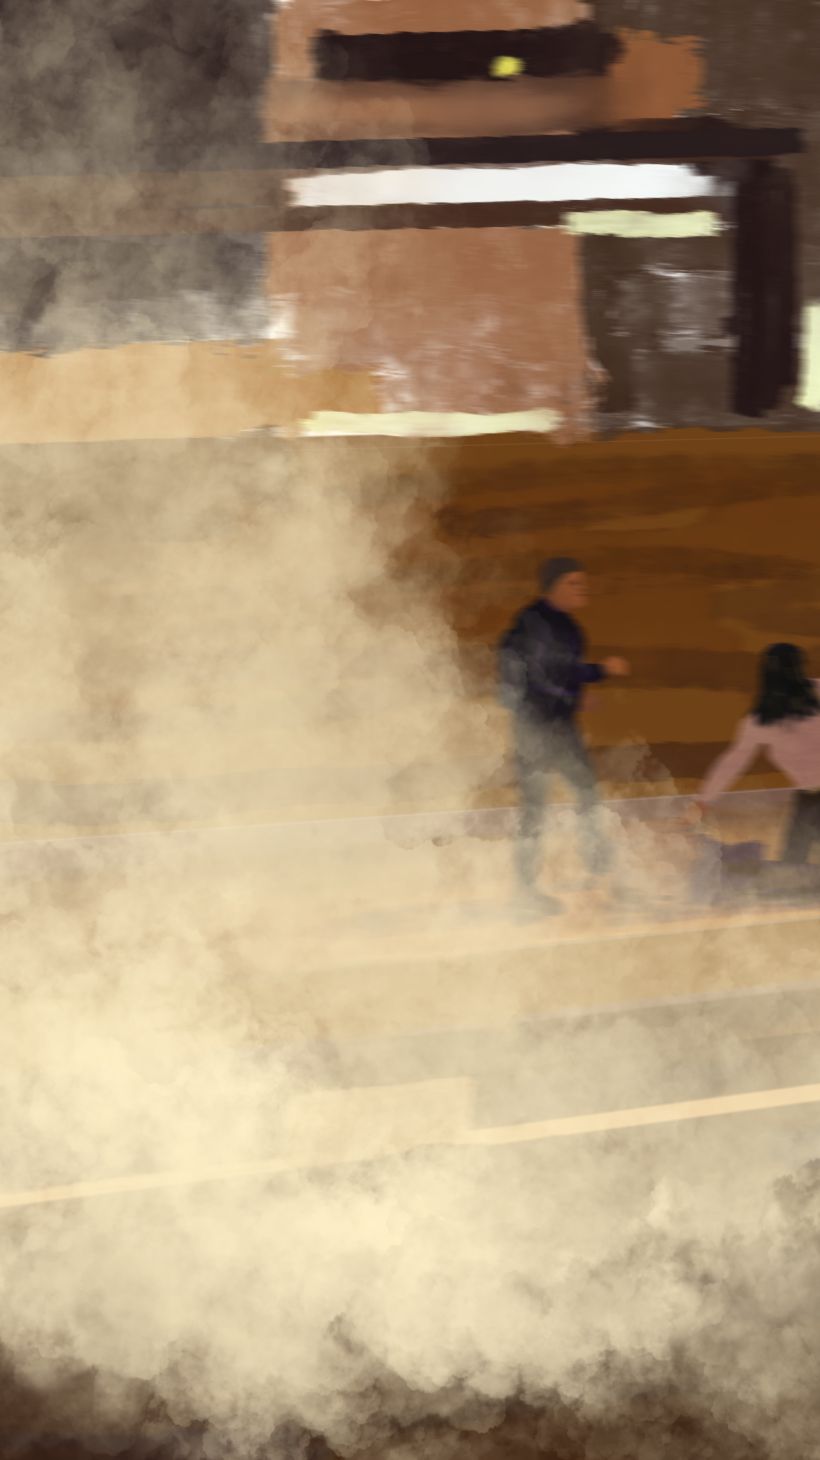 An illustration of three people on the street at night with a large amount of teargas smoke coming from the left end of the illustration.